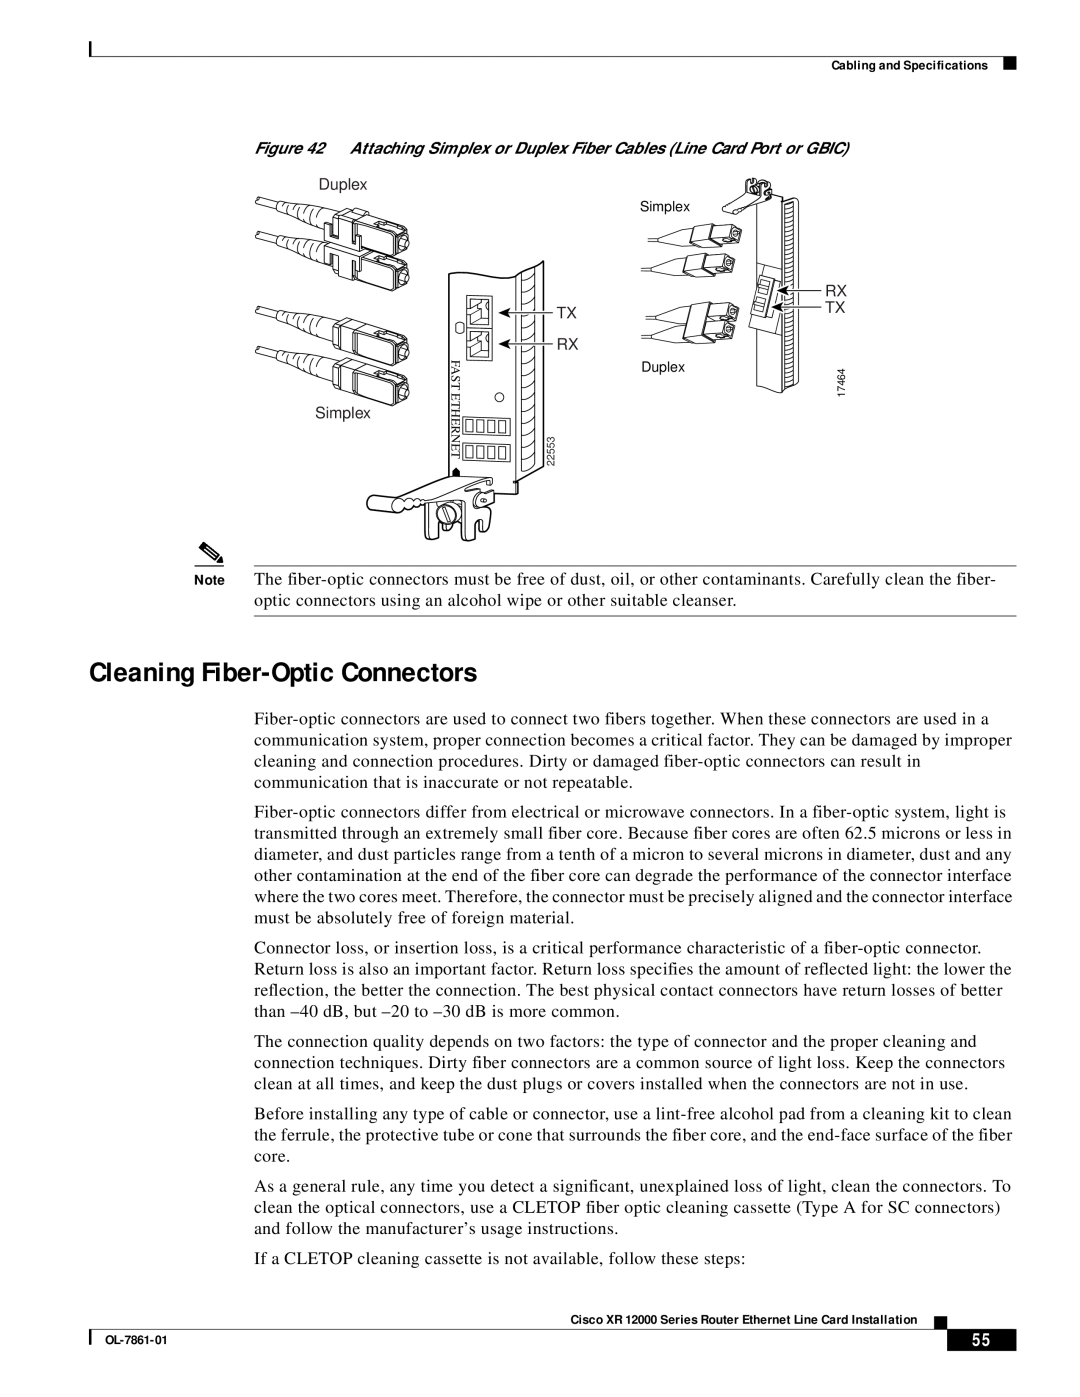 Cisco Systems OL-7861-01 manual Cleaning Fiber-Optic Connectors 